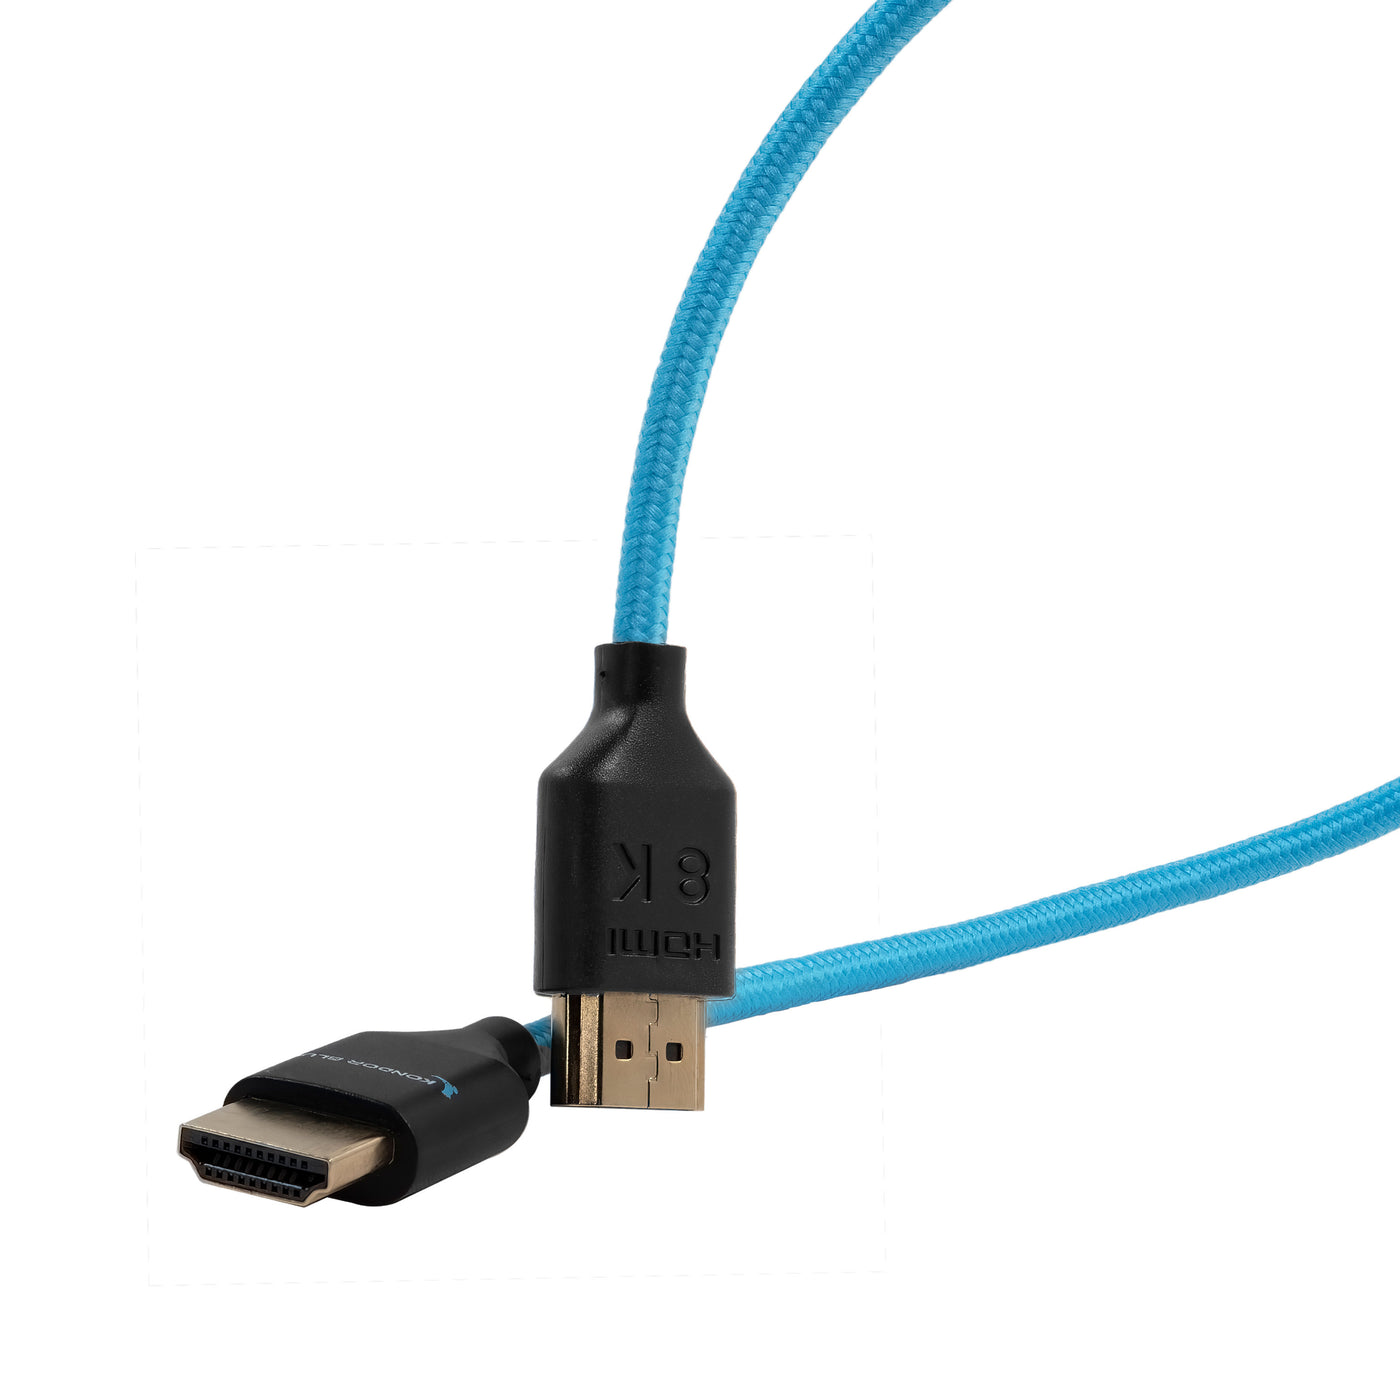 Micro-HDMI to HDMI Coiled Cable - Blue, Black, or Red – Kondor Blue